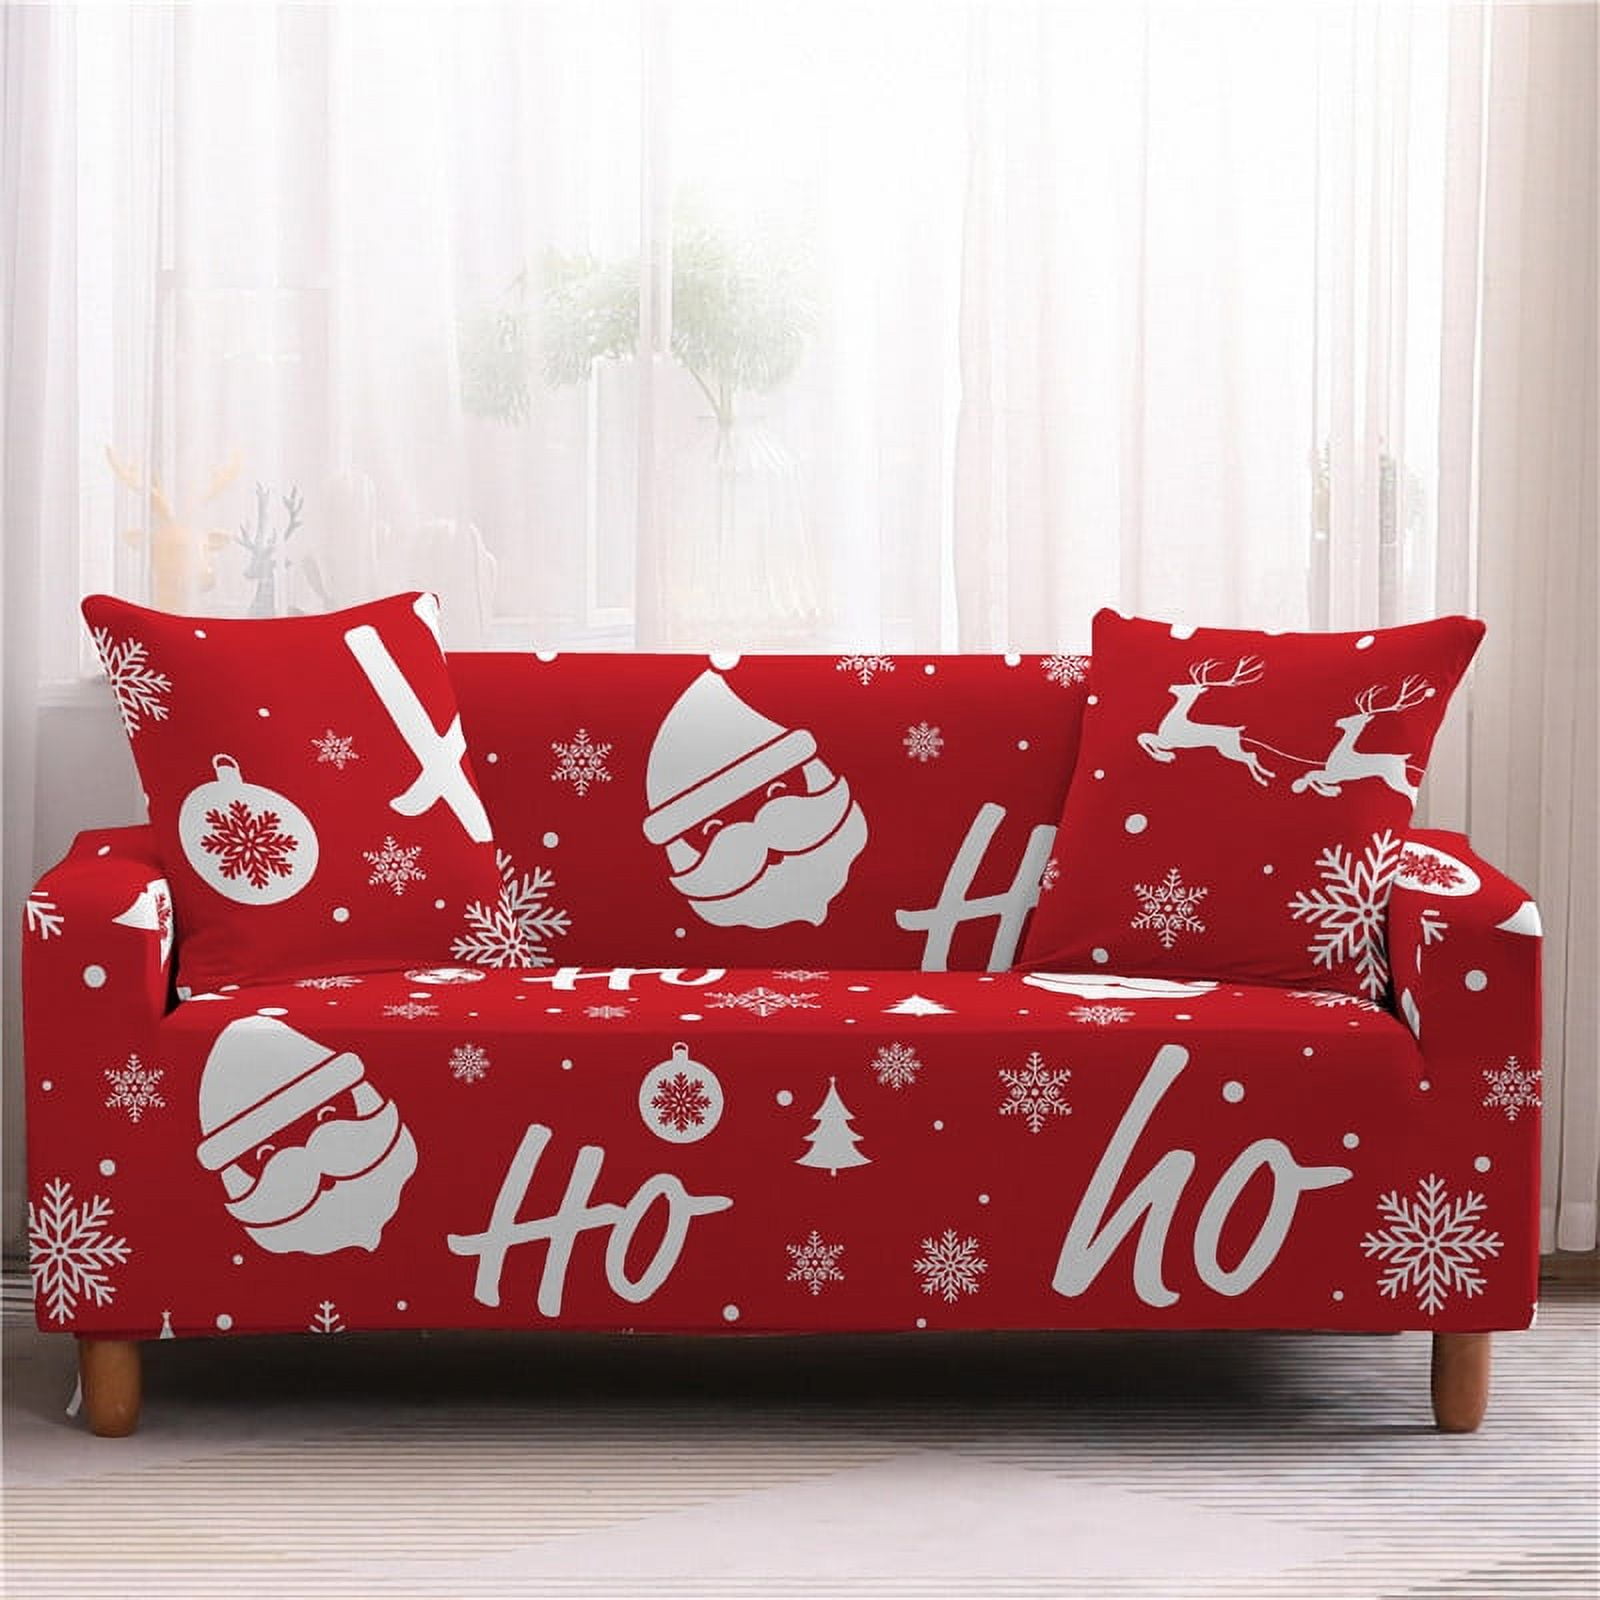 Christmas Sofa Covers,Sofa Cover 3 Seater,Furniture Protector,Digital  Christmas Printed Couch Cover Holiday Decoration,Washable Couch Cover Keep  Couch Cushions From Sliding,Christmas Home Decor 